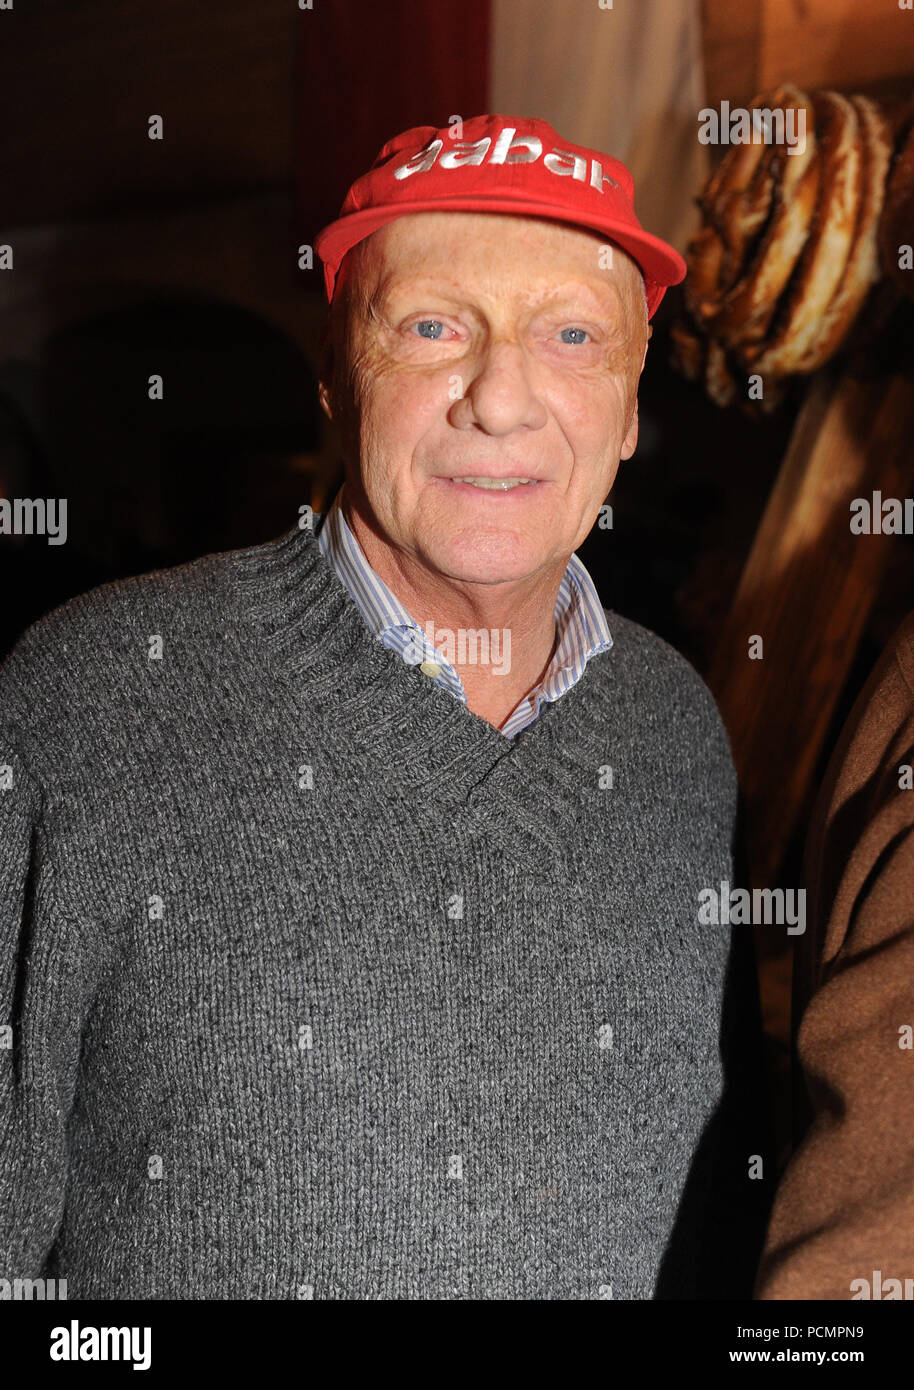 Austrian formula one legend  Niki Lauda attends the 21st traditional 'Weisswurst Party' (Bavarian veal sausage party) at the well-known 'Stanglwirt' inn in Going, near Kitzbuehel, Austria, 20 January 2012. The event takes usually place one day prior to the men's downhill competition of the Hahnenkamm race, the alpine downhill ski race. Photo: Felix Hoehager | usage worldwide Stock Photo